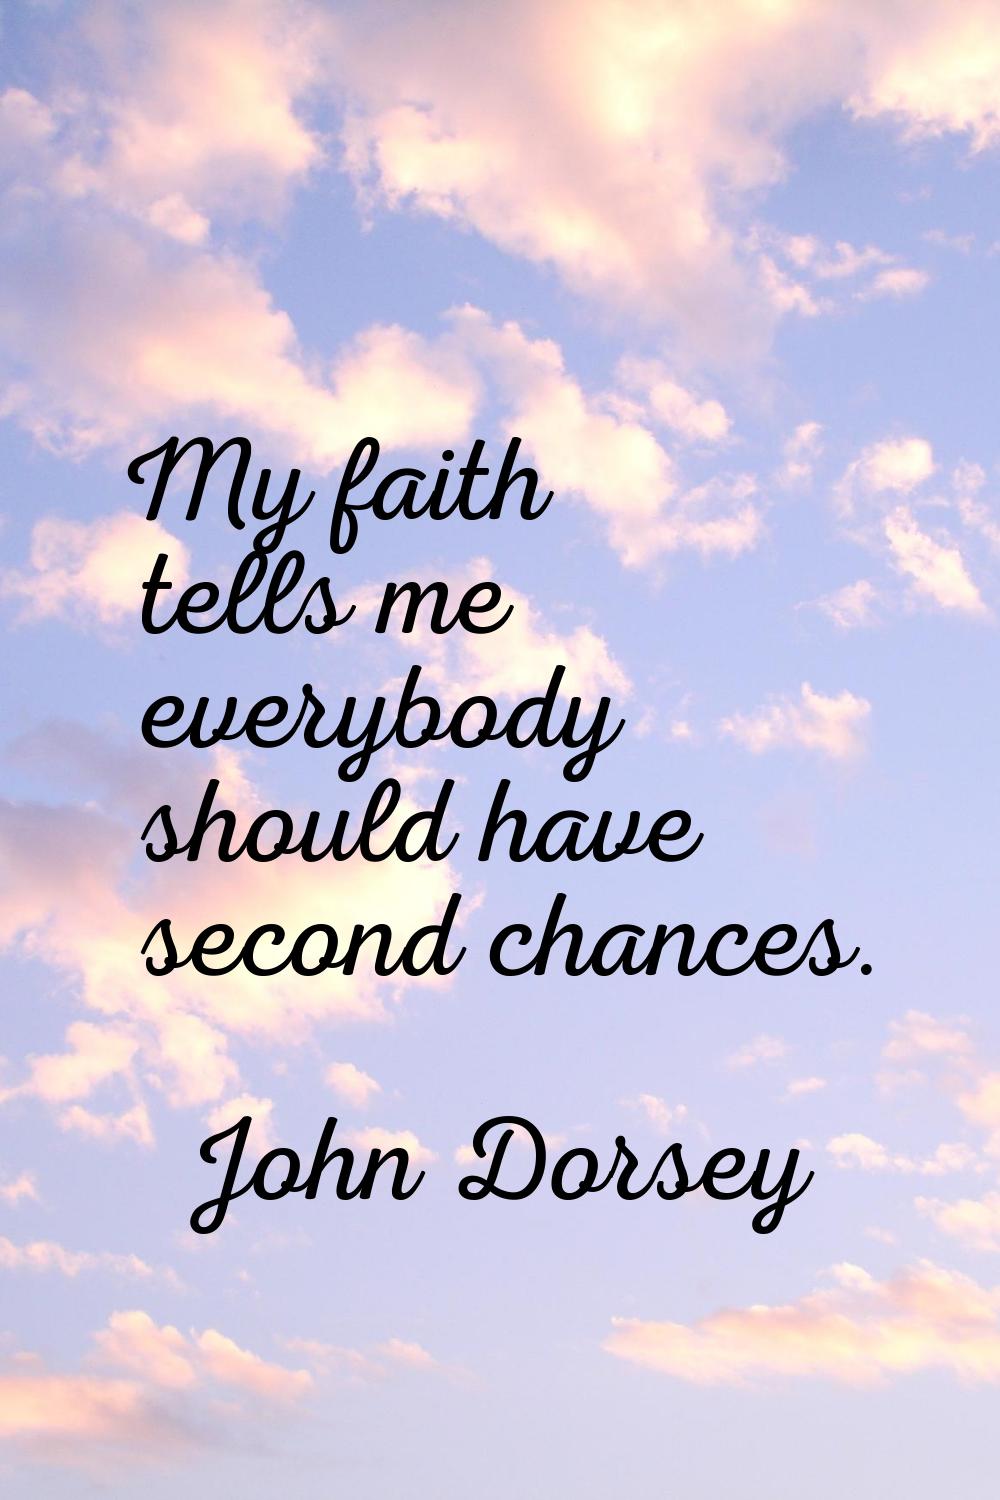 My faith tells me everybody should have second chances.